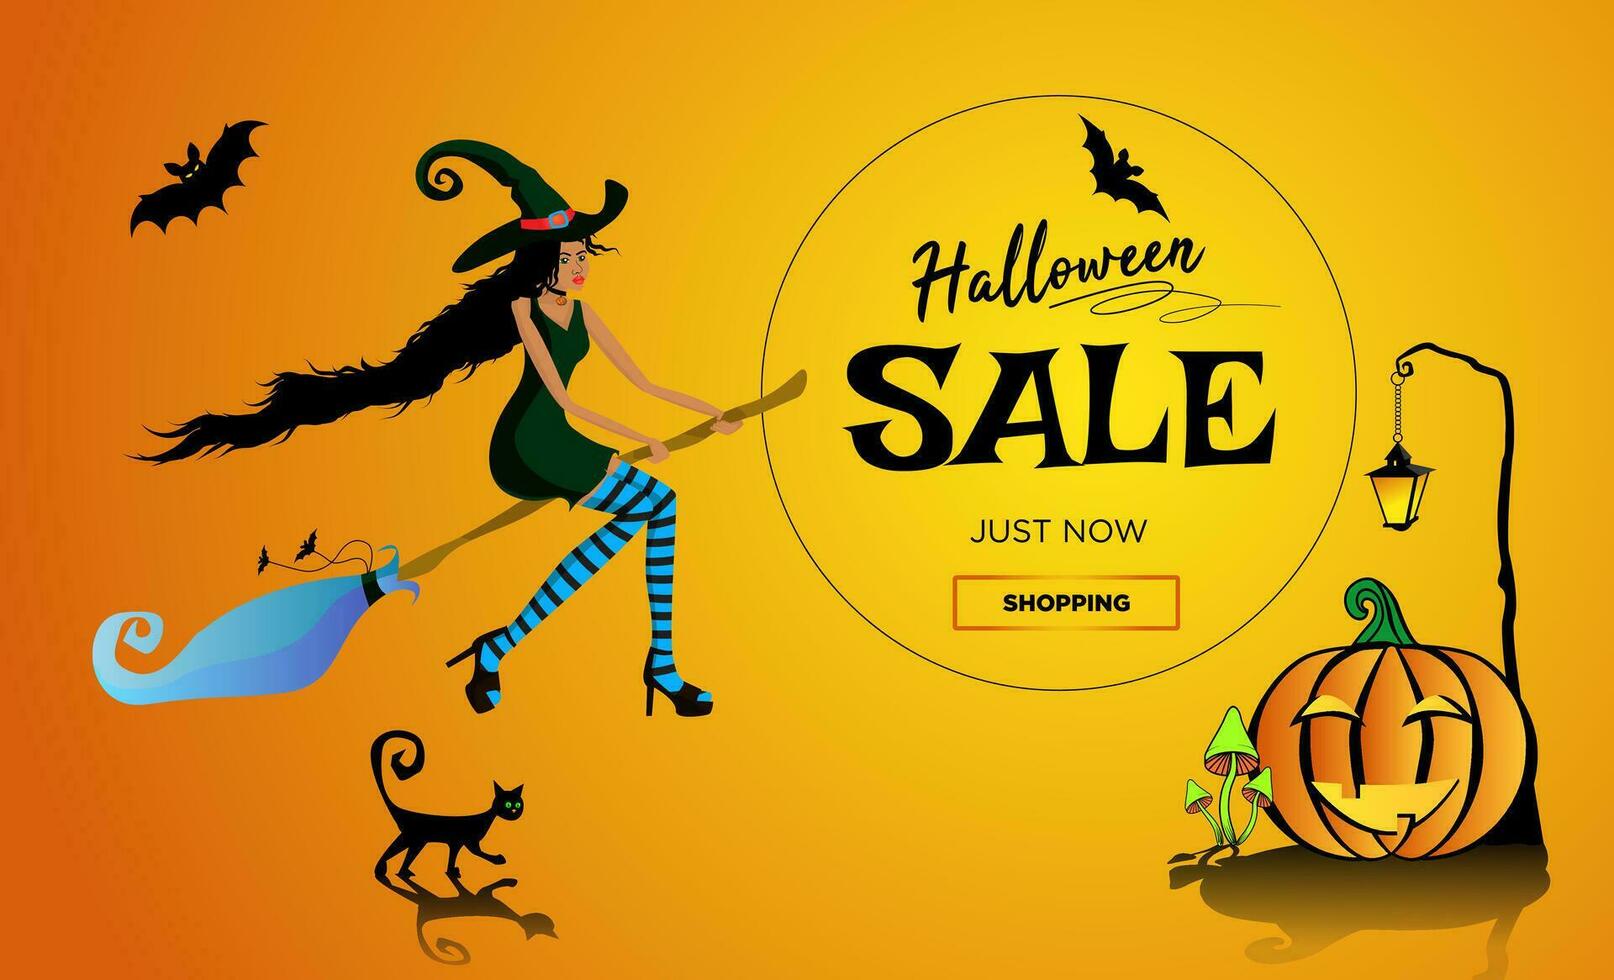 Halloween sale promotion poster, banner with a beautiful black witch flying on a broomstick, a black cat and a fun pumpkin. Glowing mushrooms and bats. Orange gradient background. vector